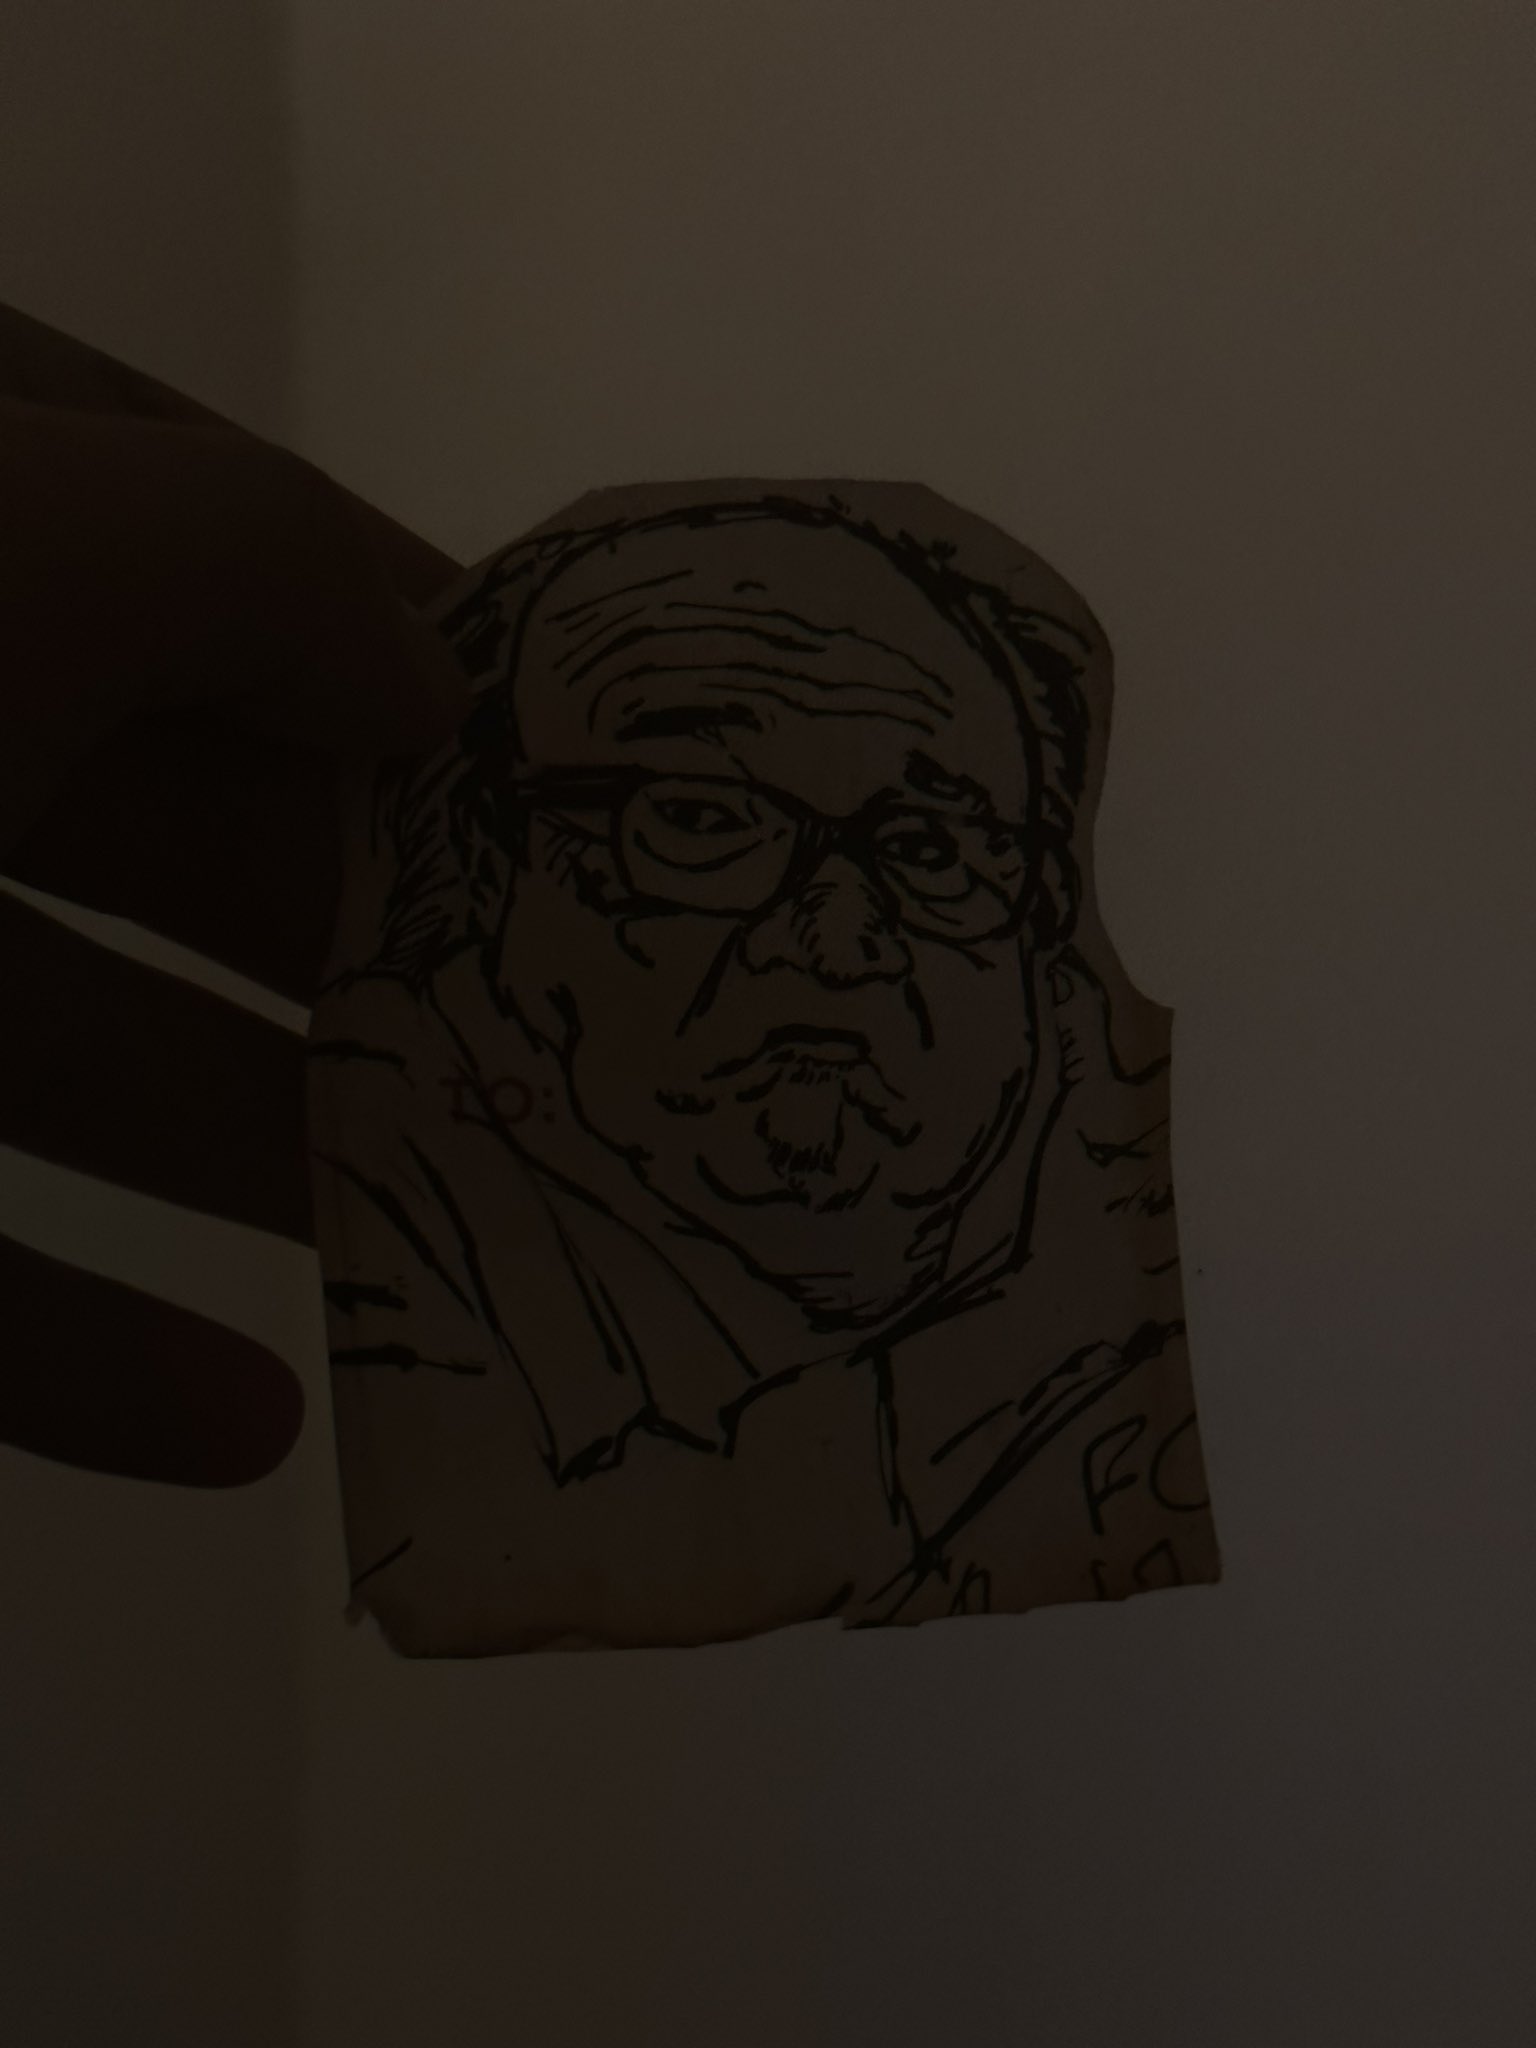 Happy birthday danny devito

drawing by we had on da back of our phones 